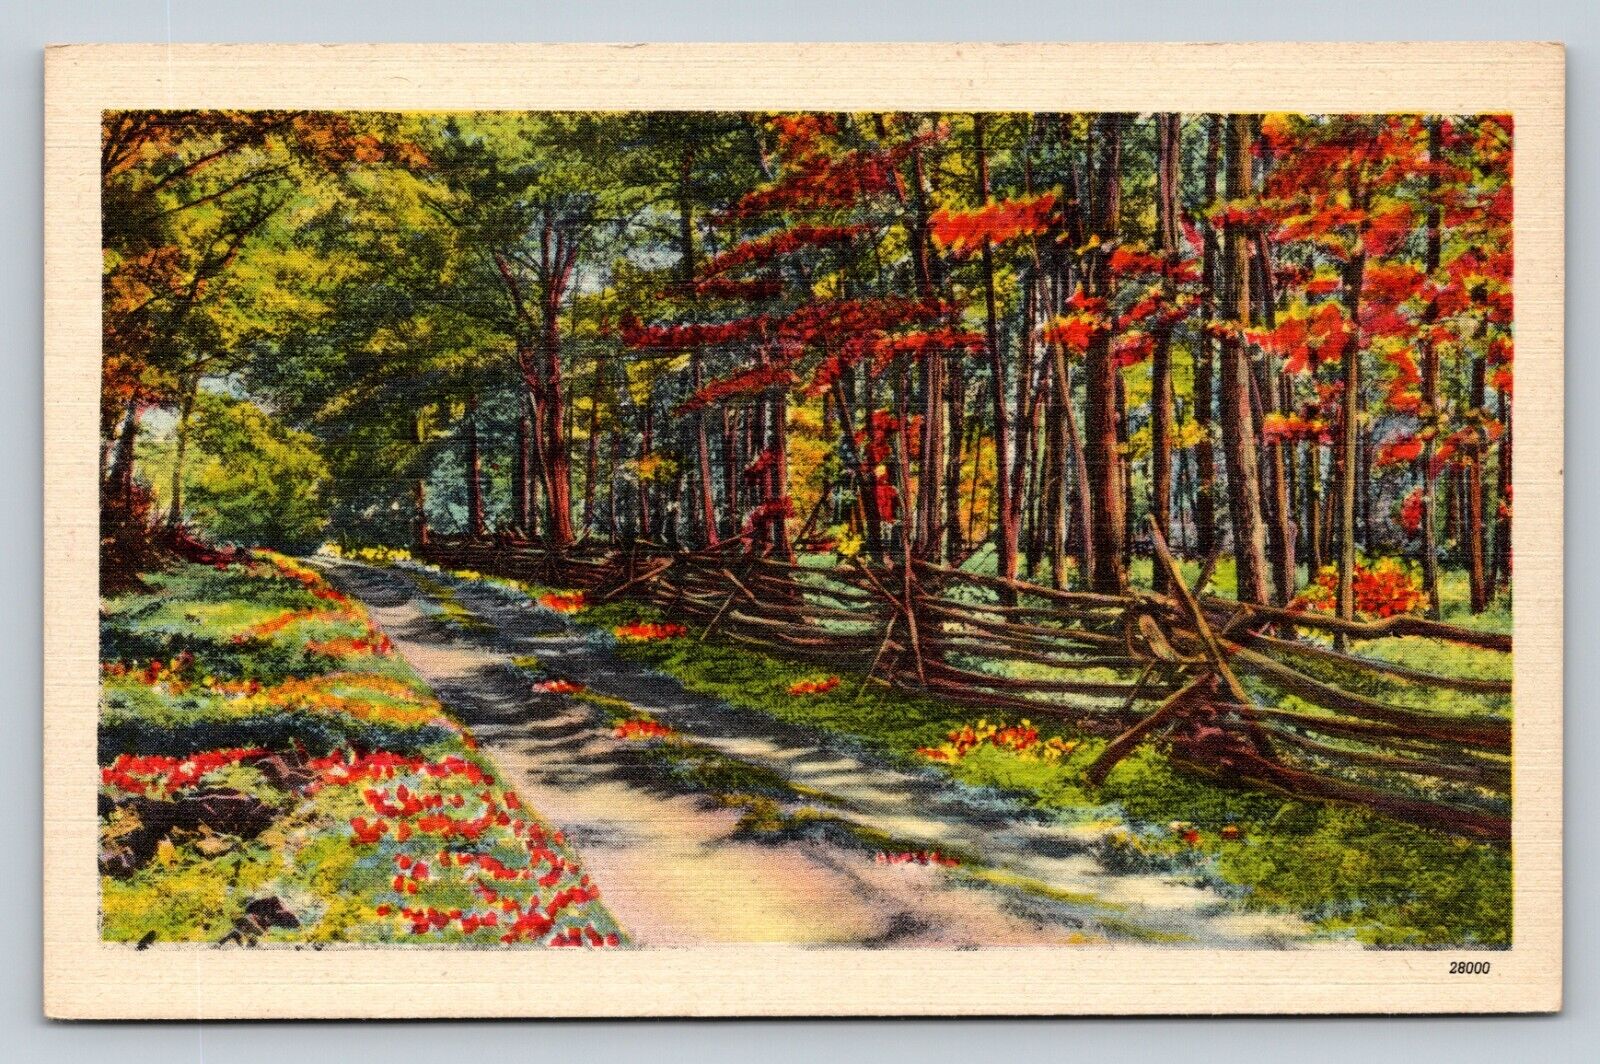 Dirt Road Next To A Wooden Fence Nature Blooming VINTAGE Linen Postcard Unposted